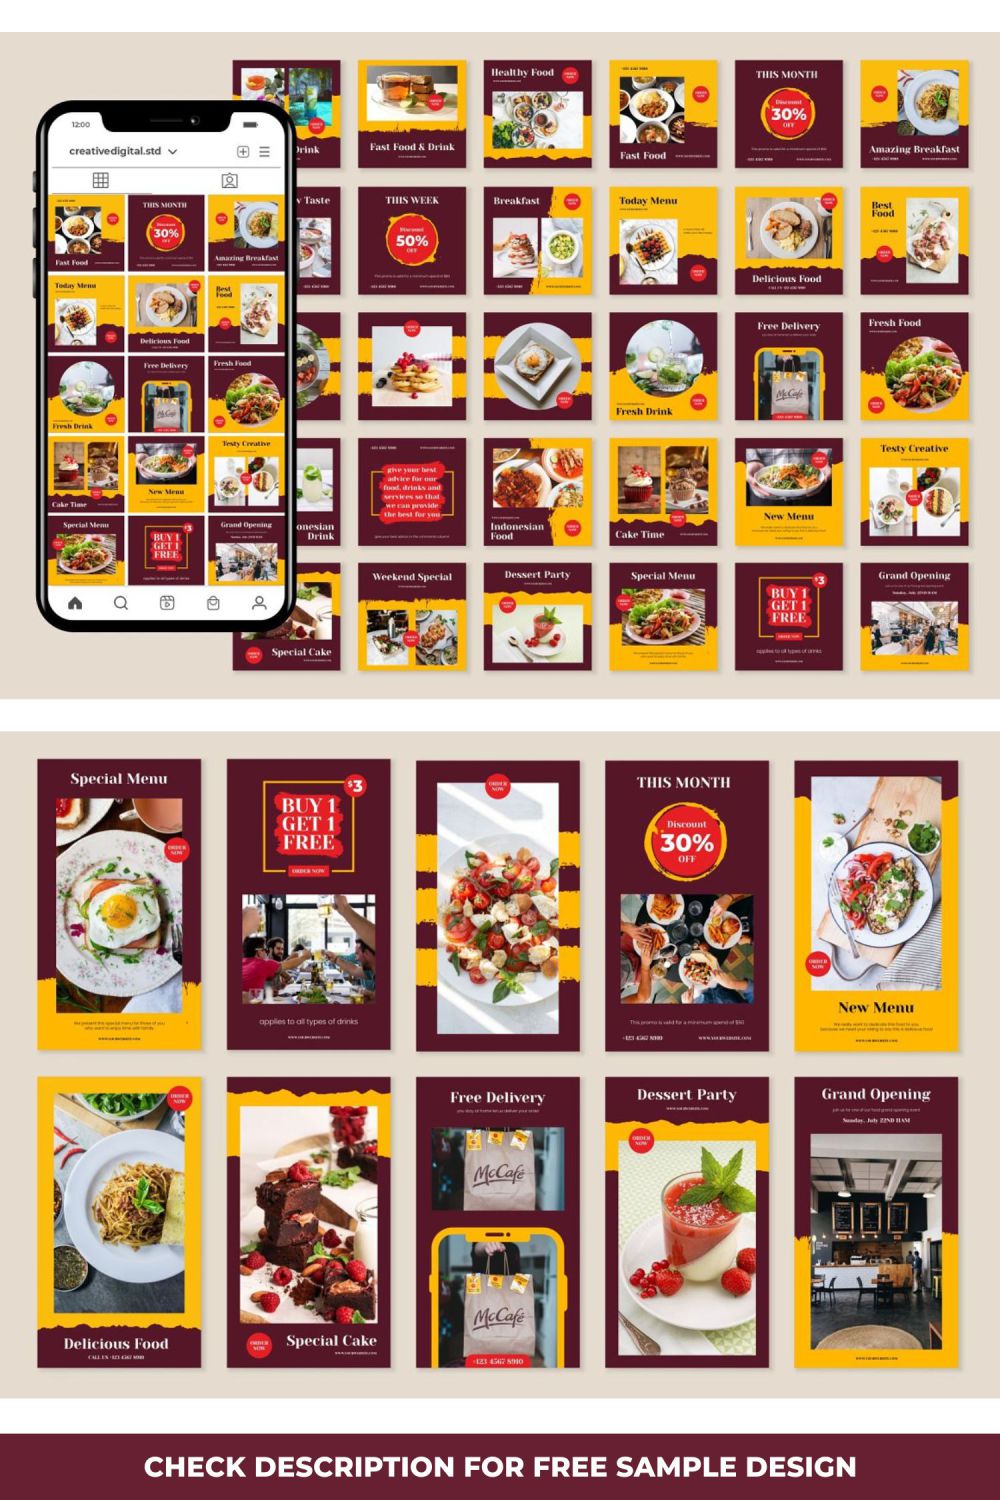 Food & Beverage Story and Icon Social Media Template Pinterest Image.